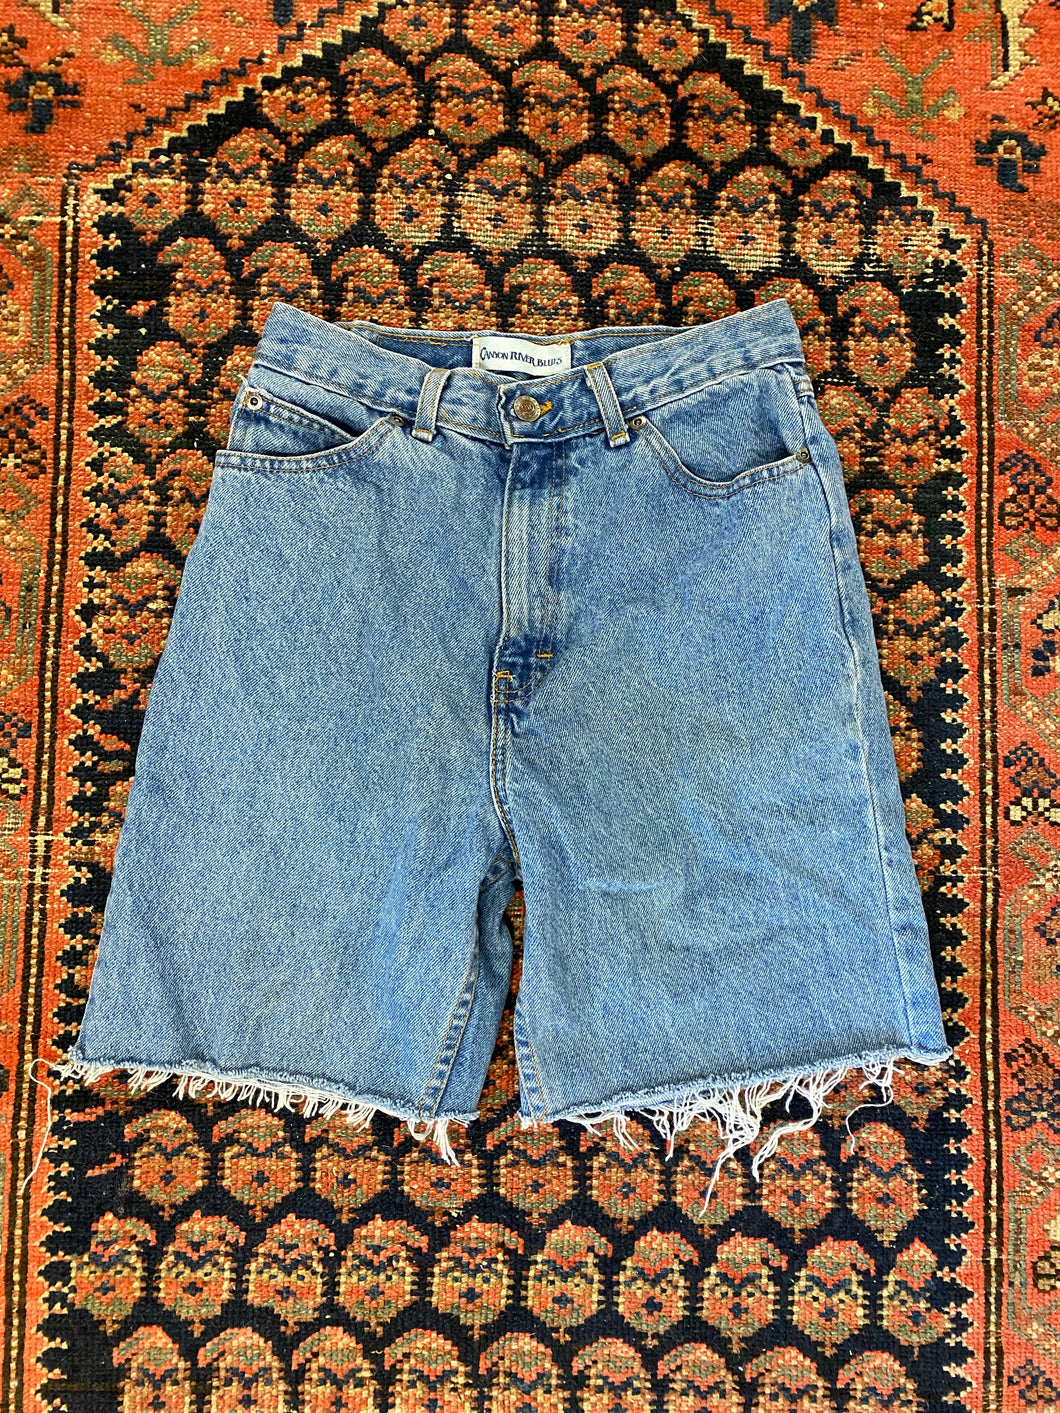 Vintage High Waisted Canyon River Blues Frayed Denim Shorts - 26in